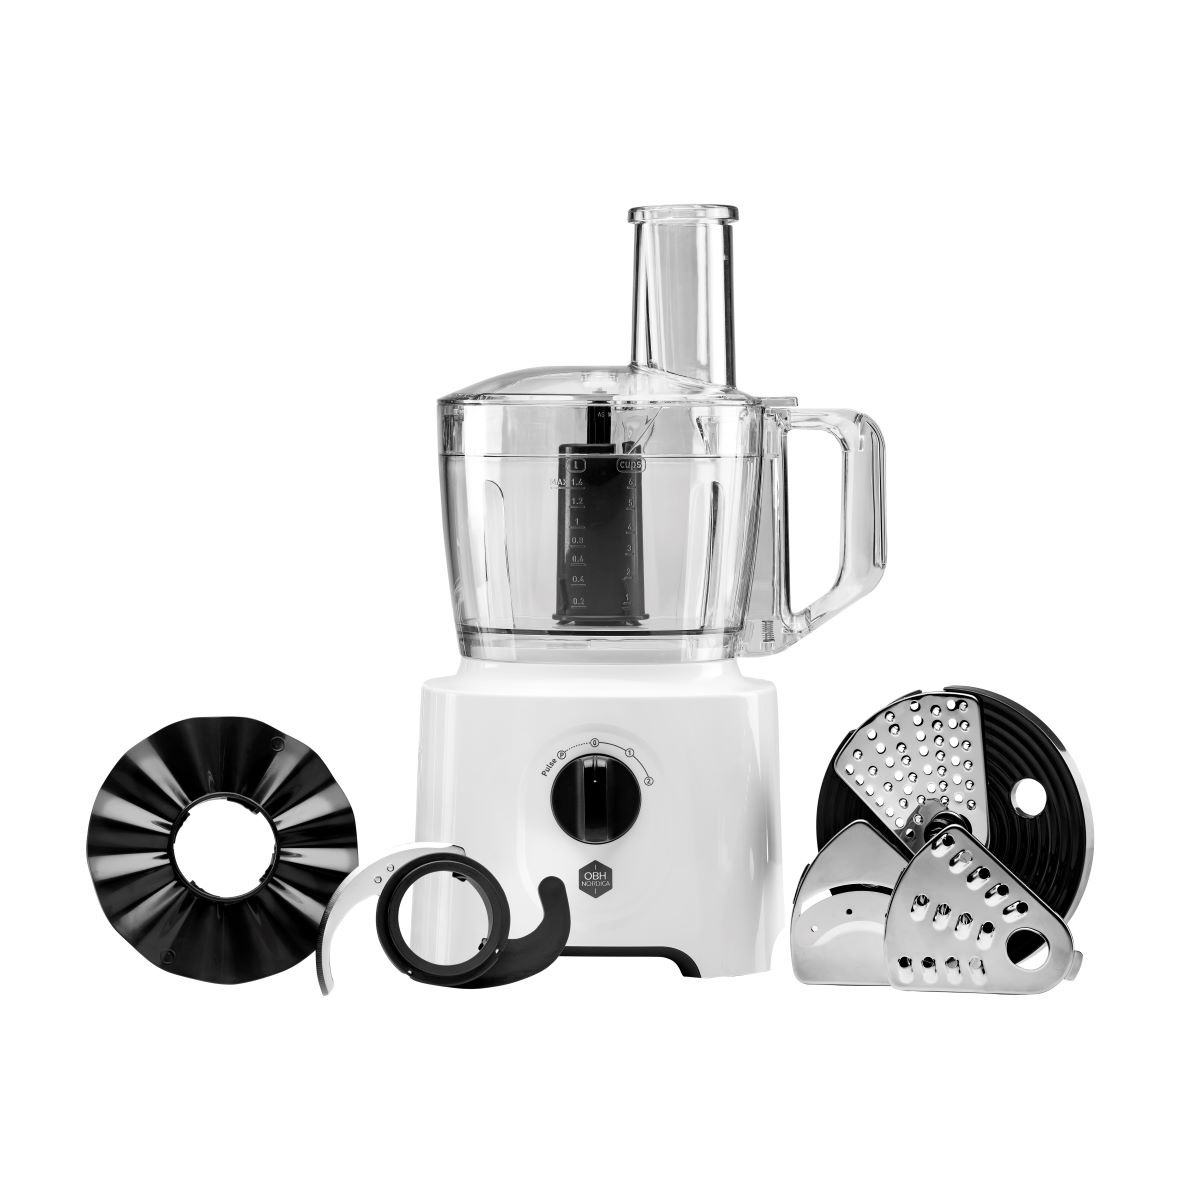 OBH Nordica foodprocessor Easy Force 700 W white